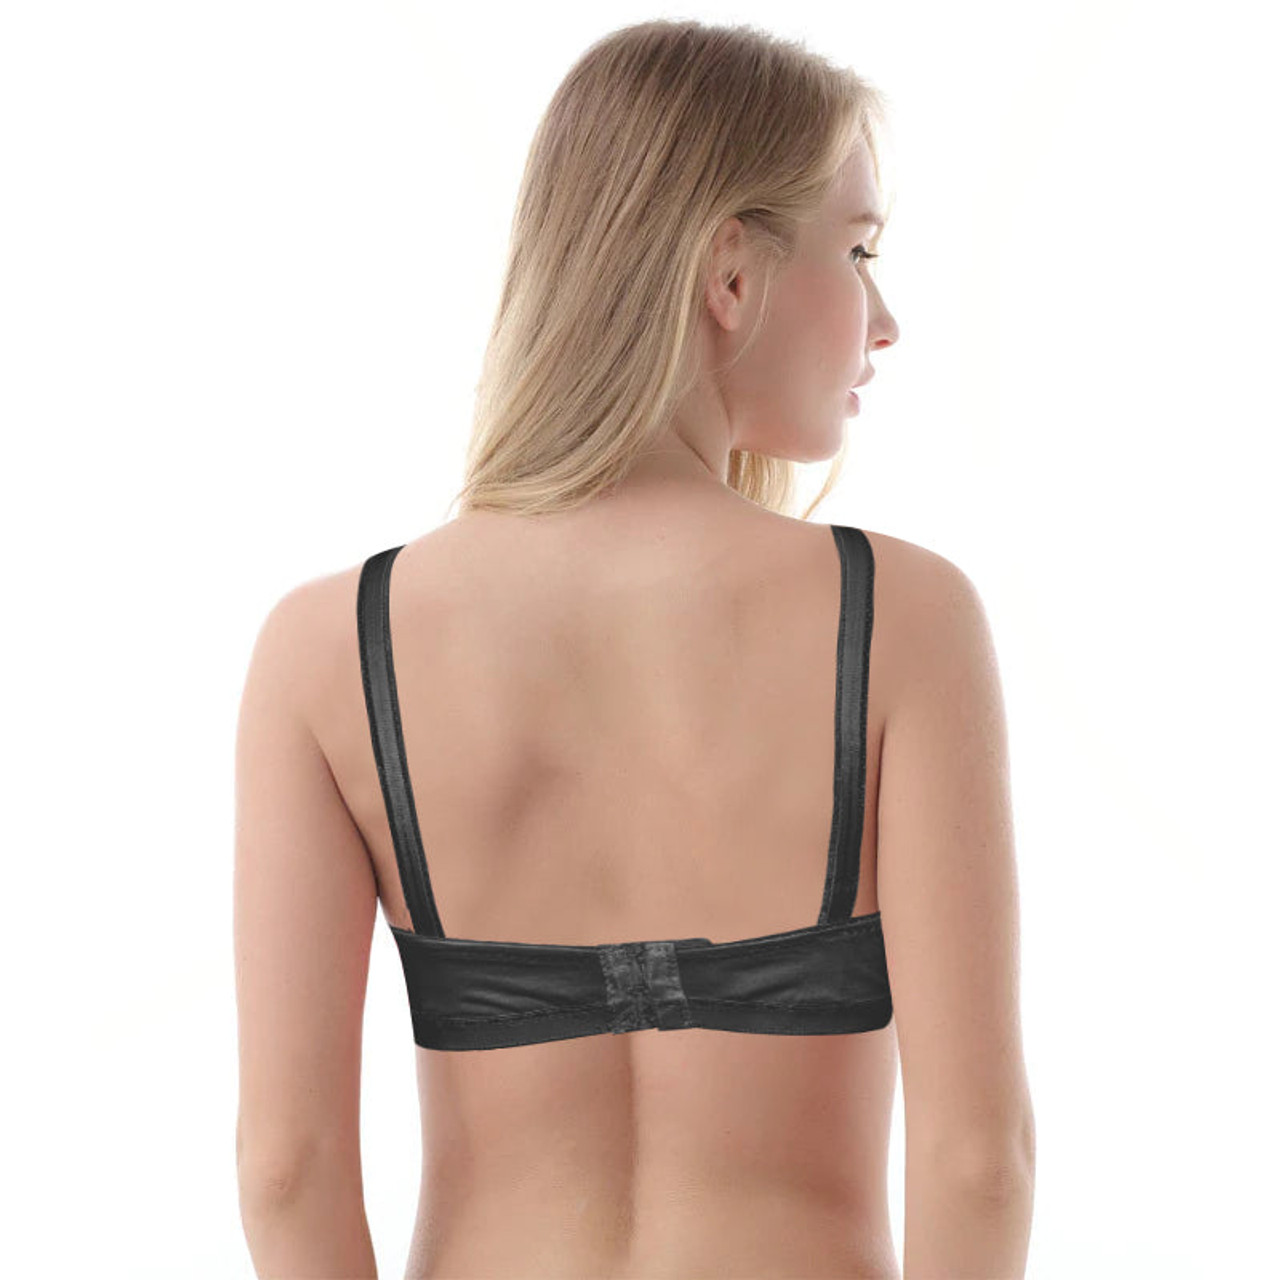 Buy Online Plus Size Cotton Thin Strap Embroidered Bra at